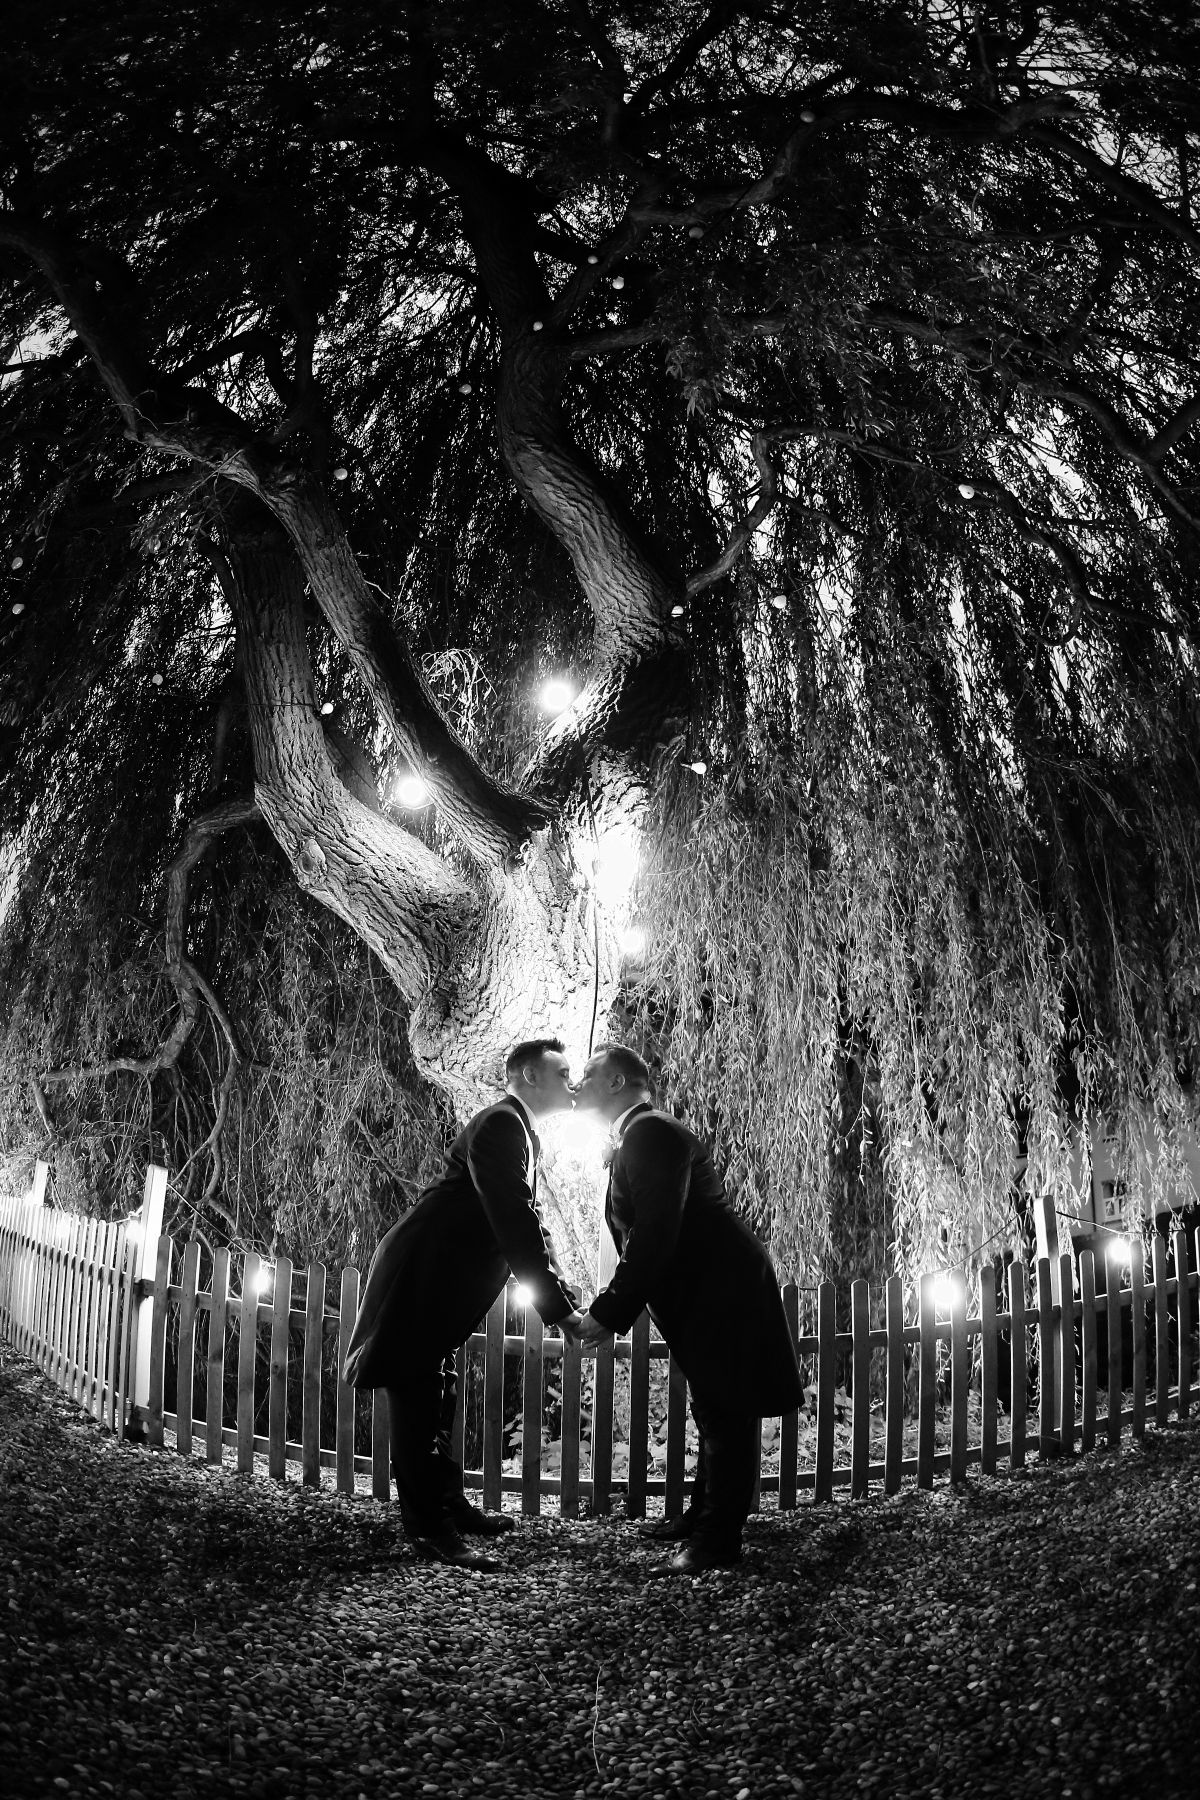 Smooching under the willow